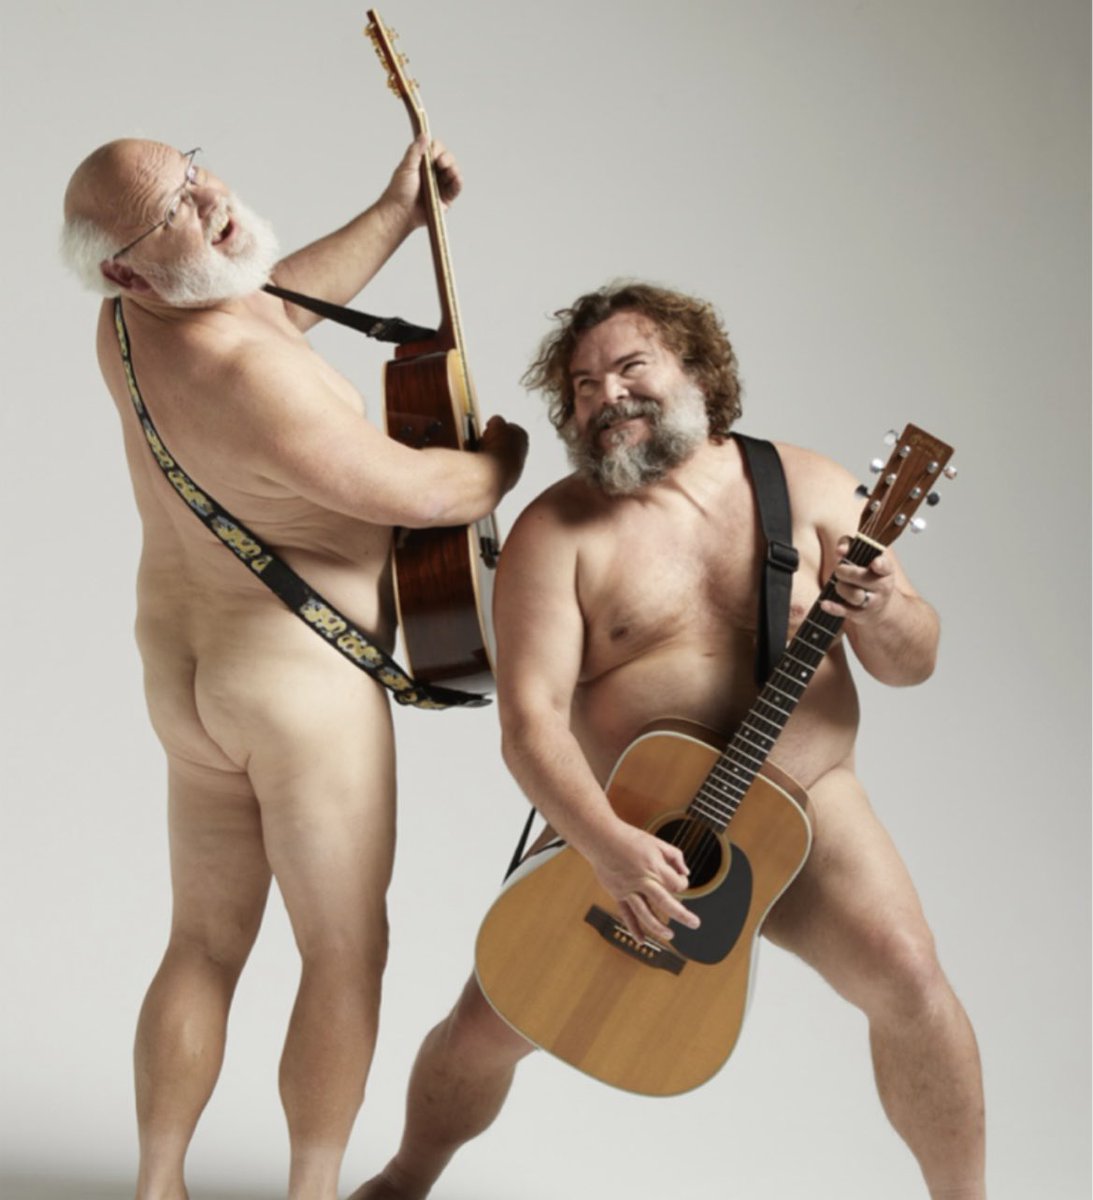 Can’t believe in 2 days I shall be in the same room as these two legends @jackblack @GassLeak #TenaciousD #SoExcited @tenaciousd